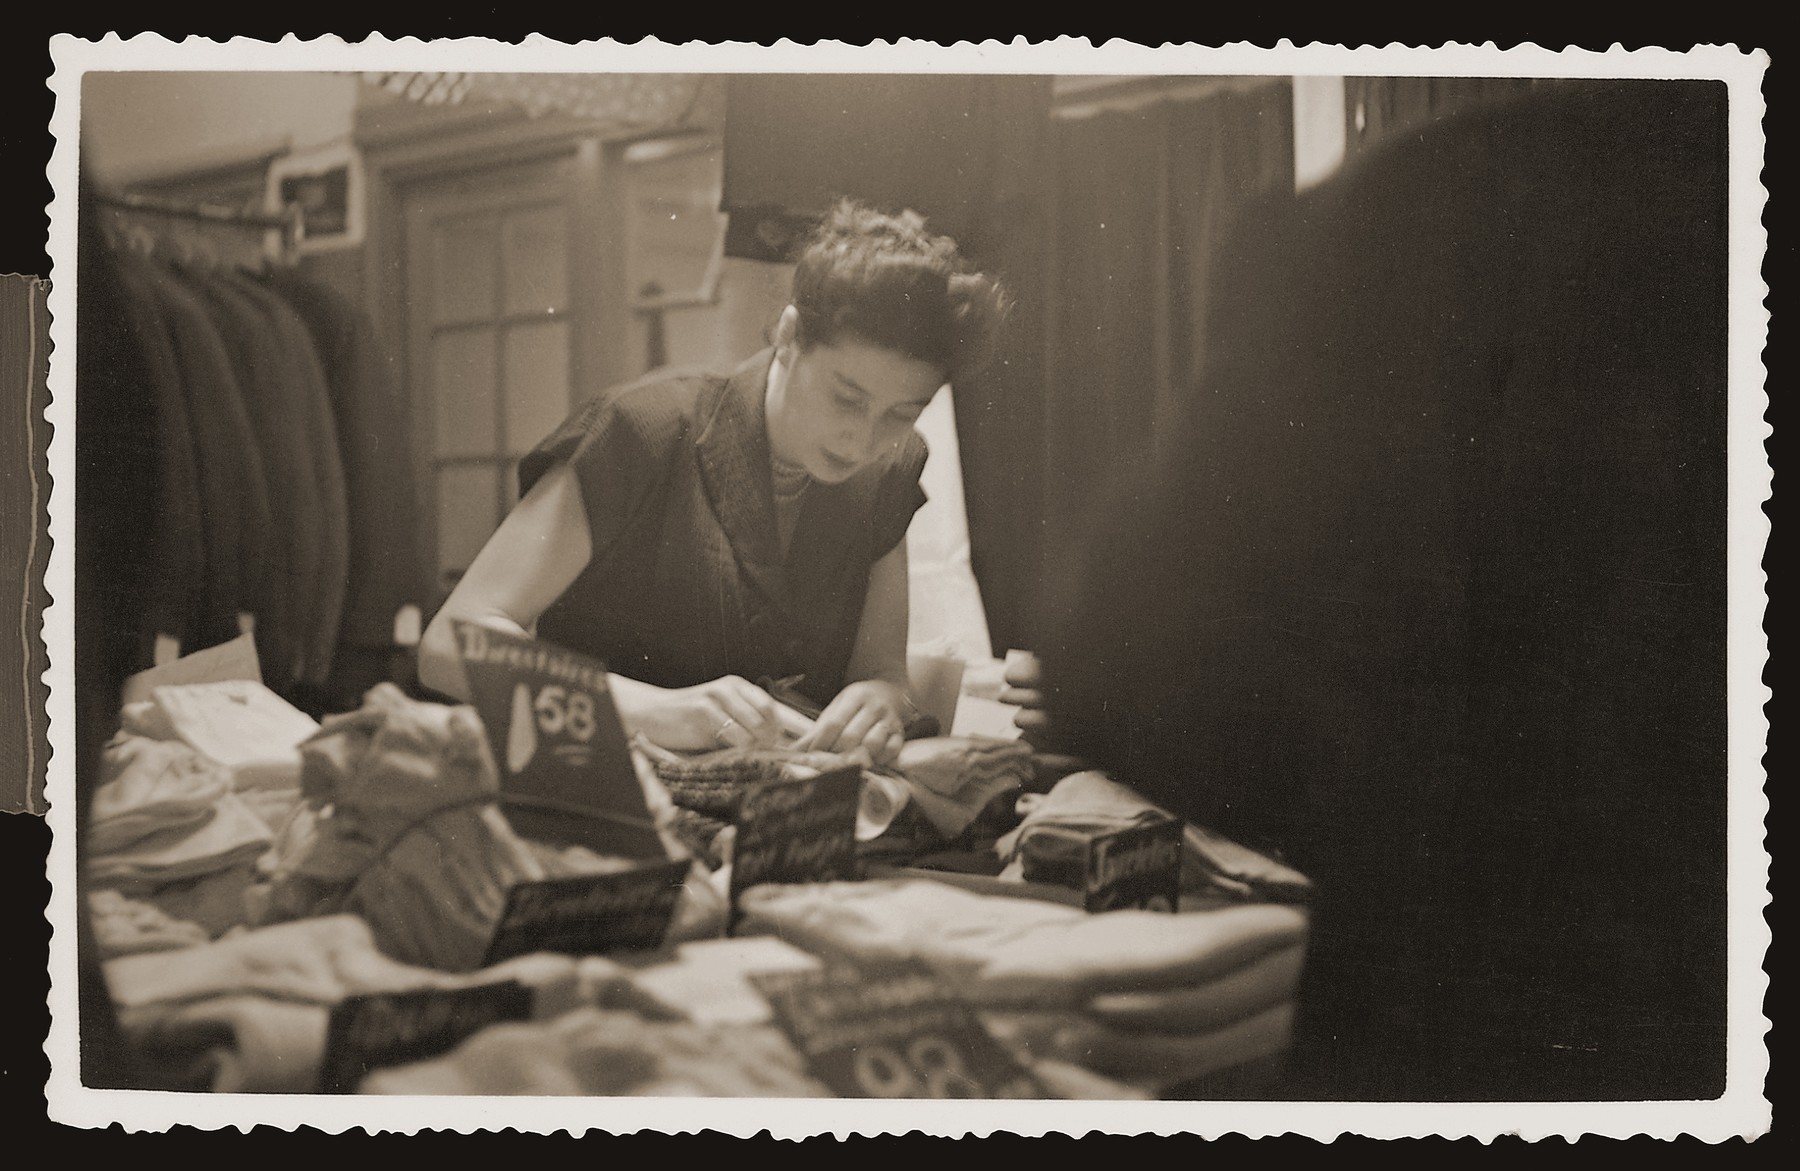 Bep Meijer working in the newly reopened Zion clothing and fabric store in Eibergen.